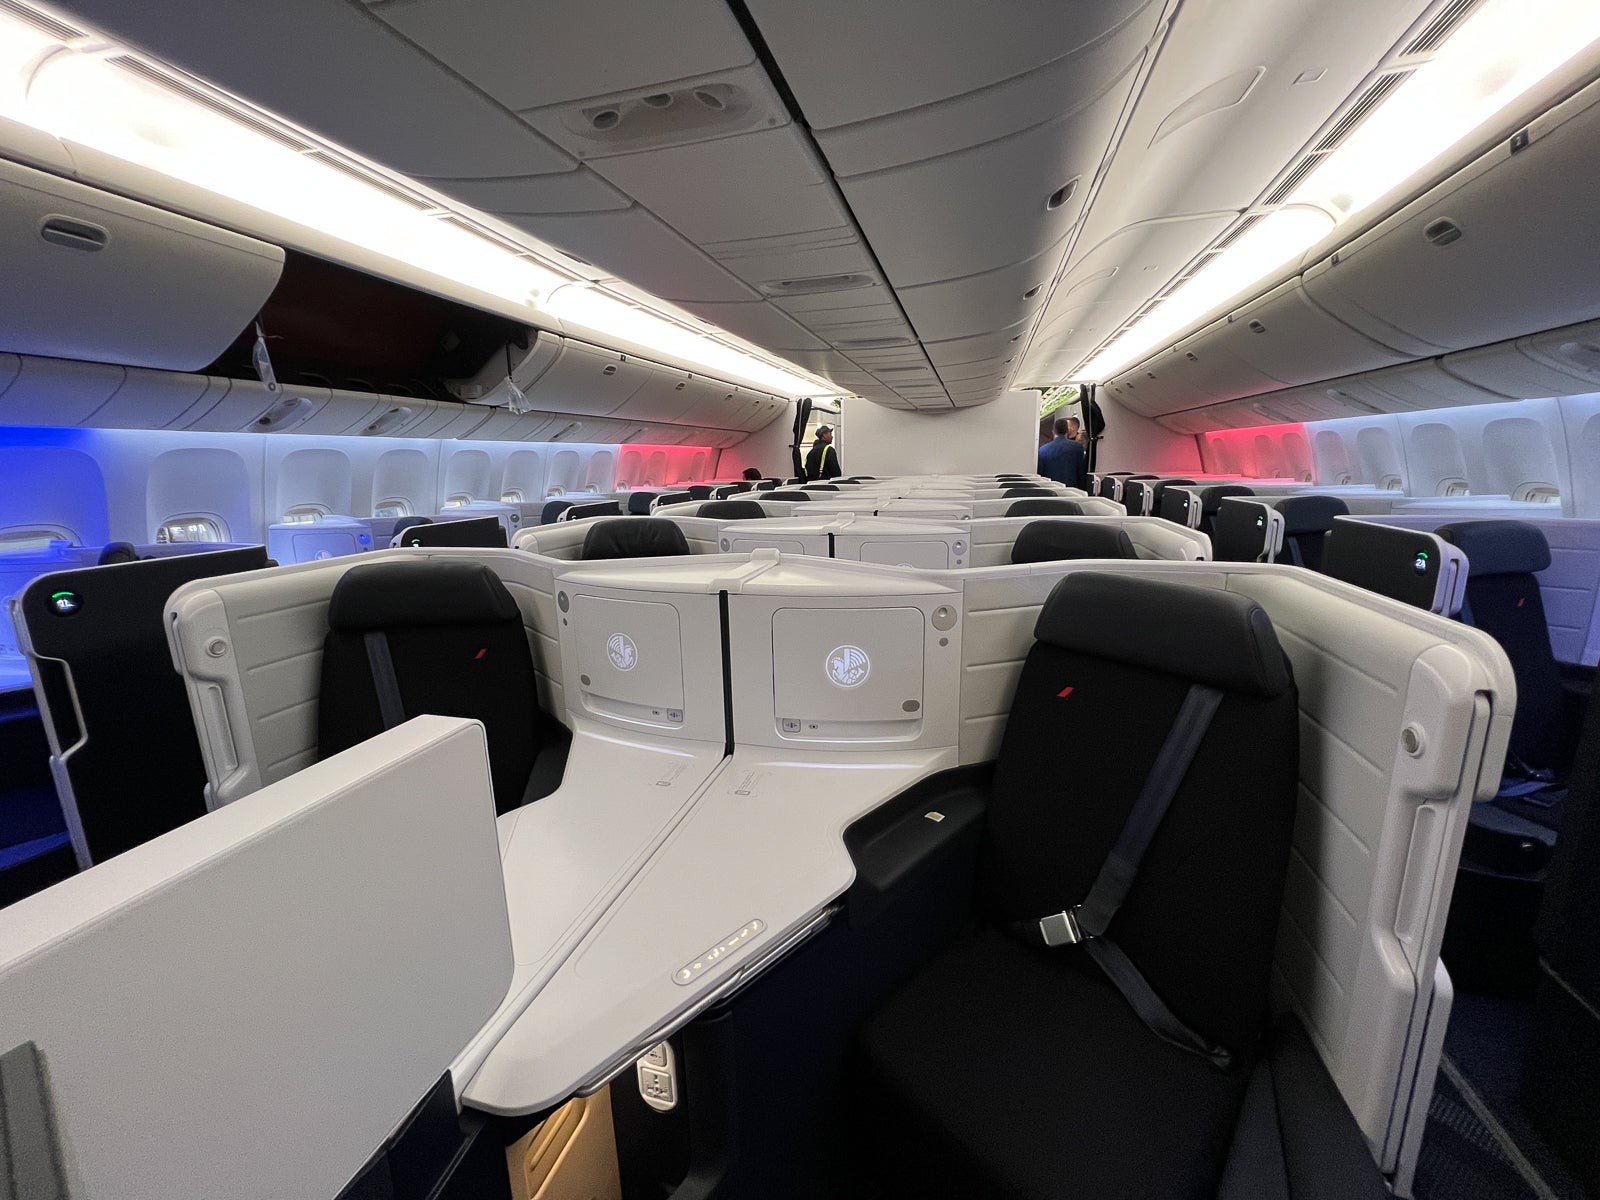 Doors, wireless charging and 4K video: A first look at Air France's new Boeing 7..